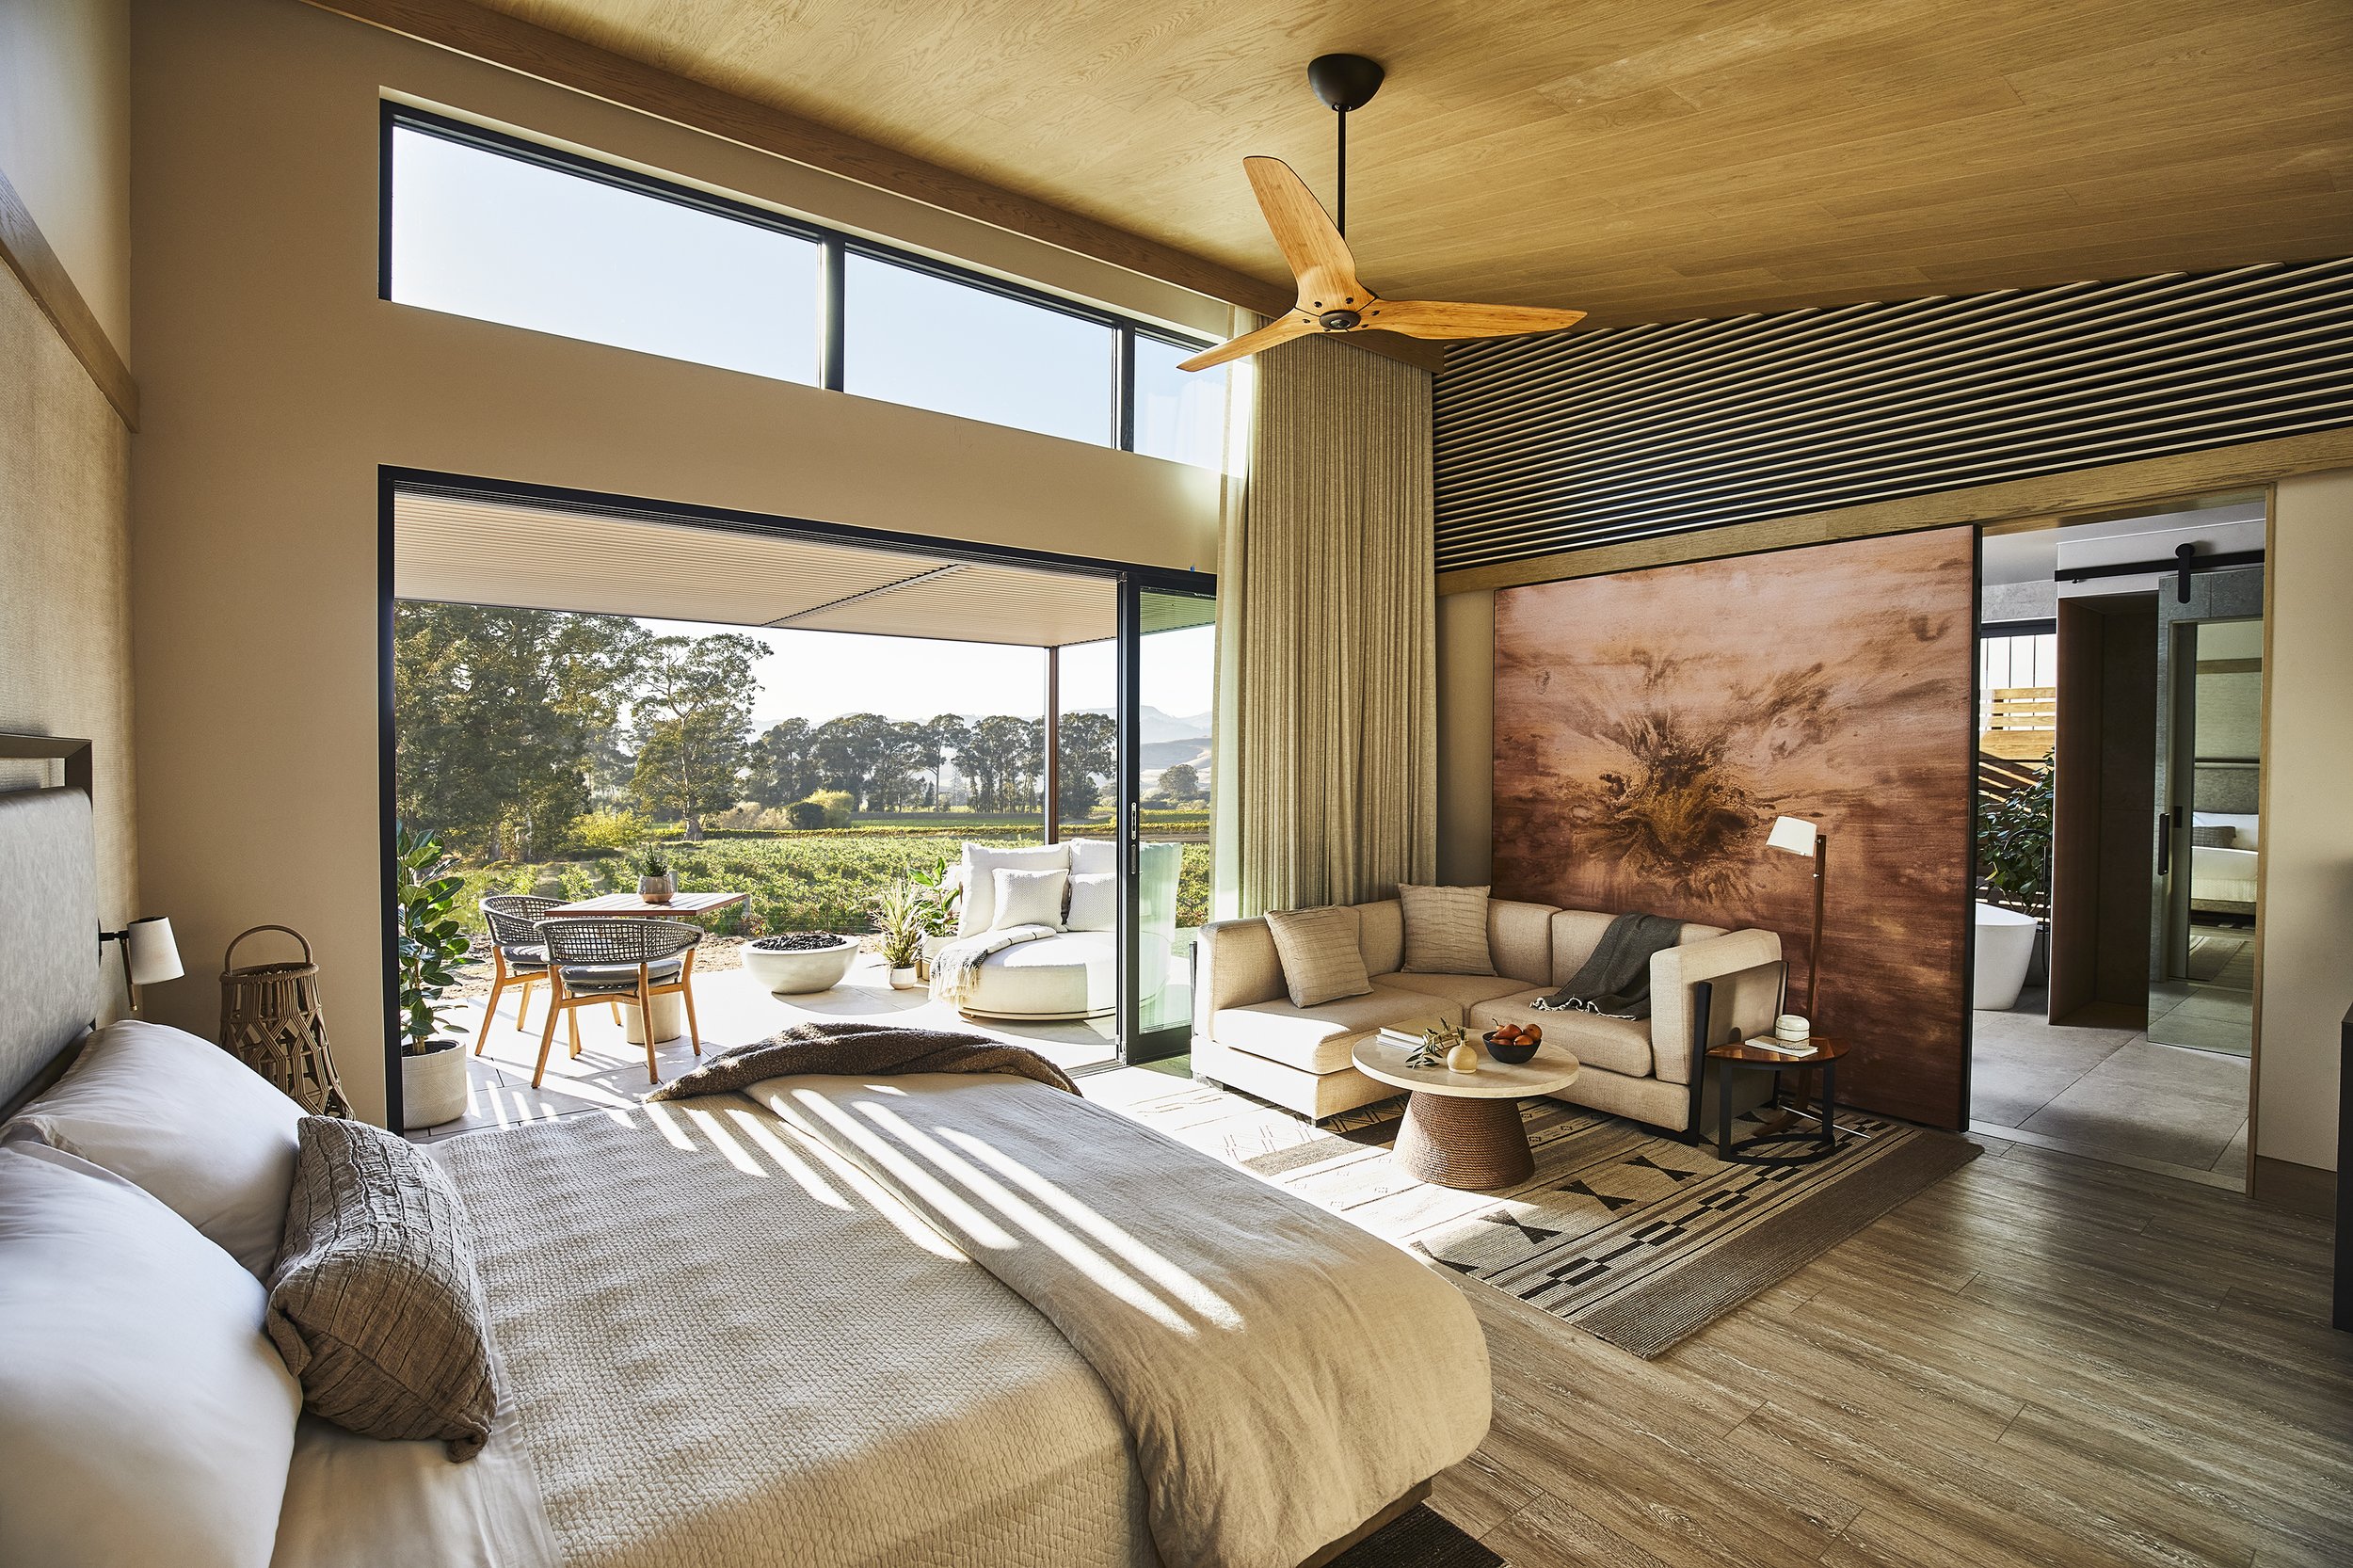 A stunning bedroom at Stanly Ranch in Napa Valley, California